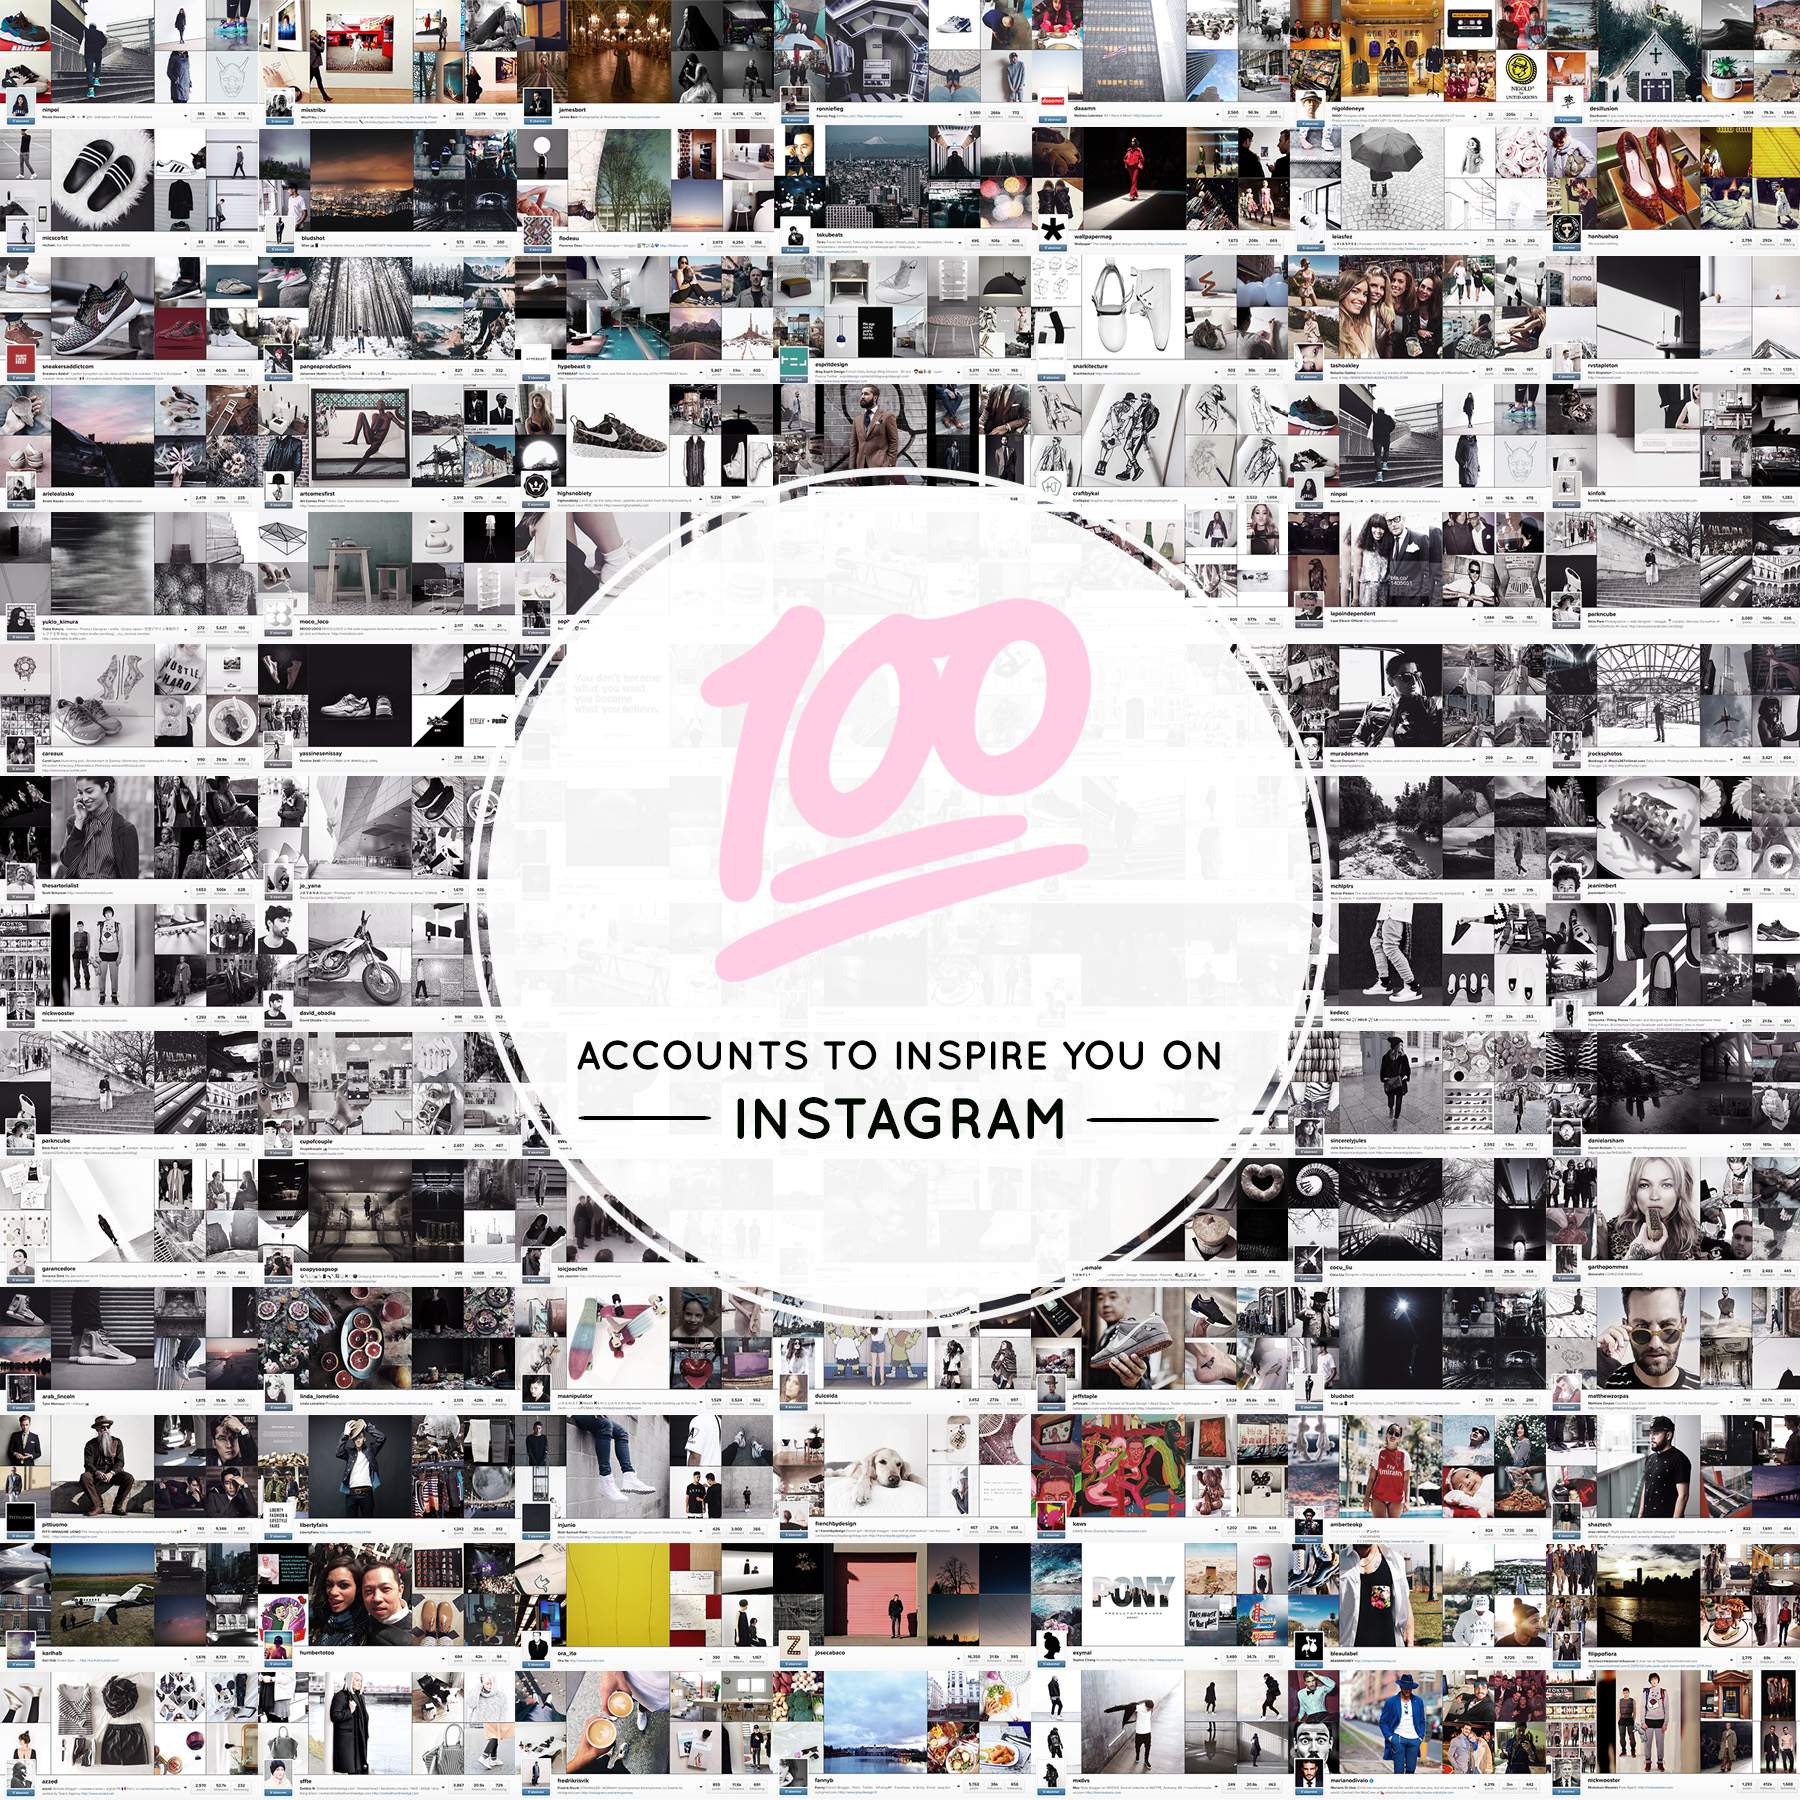 100 ACCOUNTS TO INSPIRE YOU ON INSTAGRAM